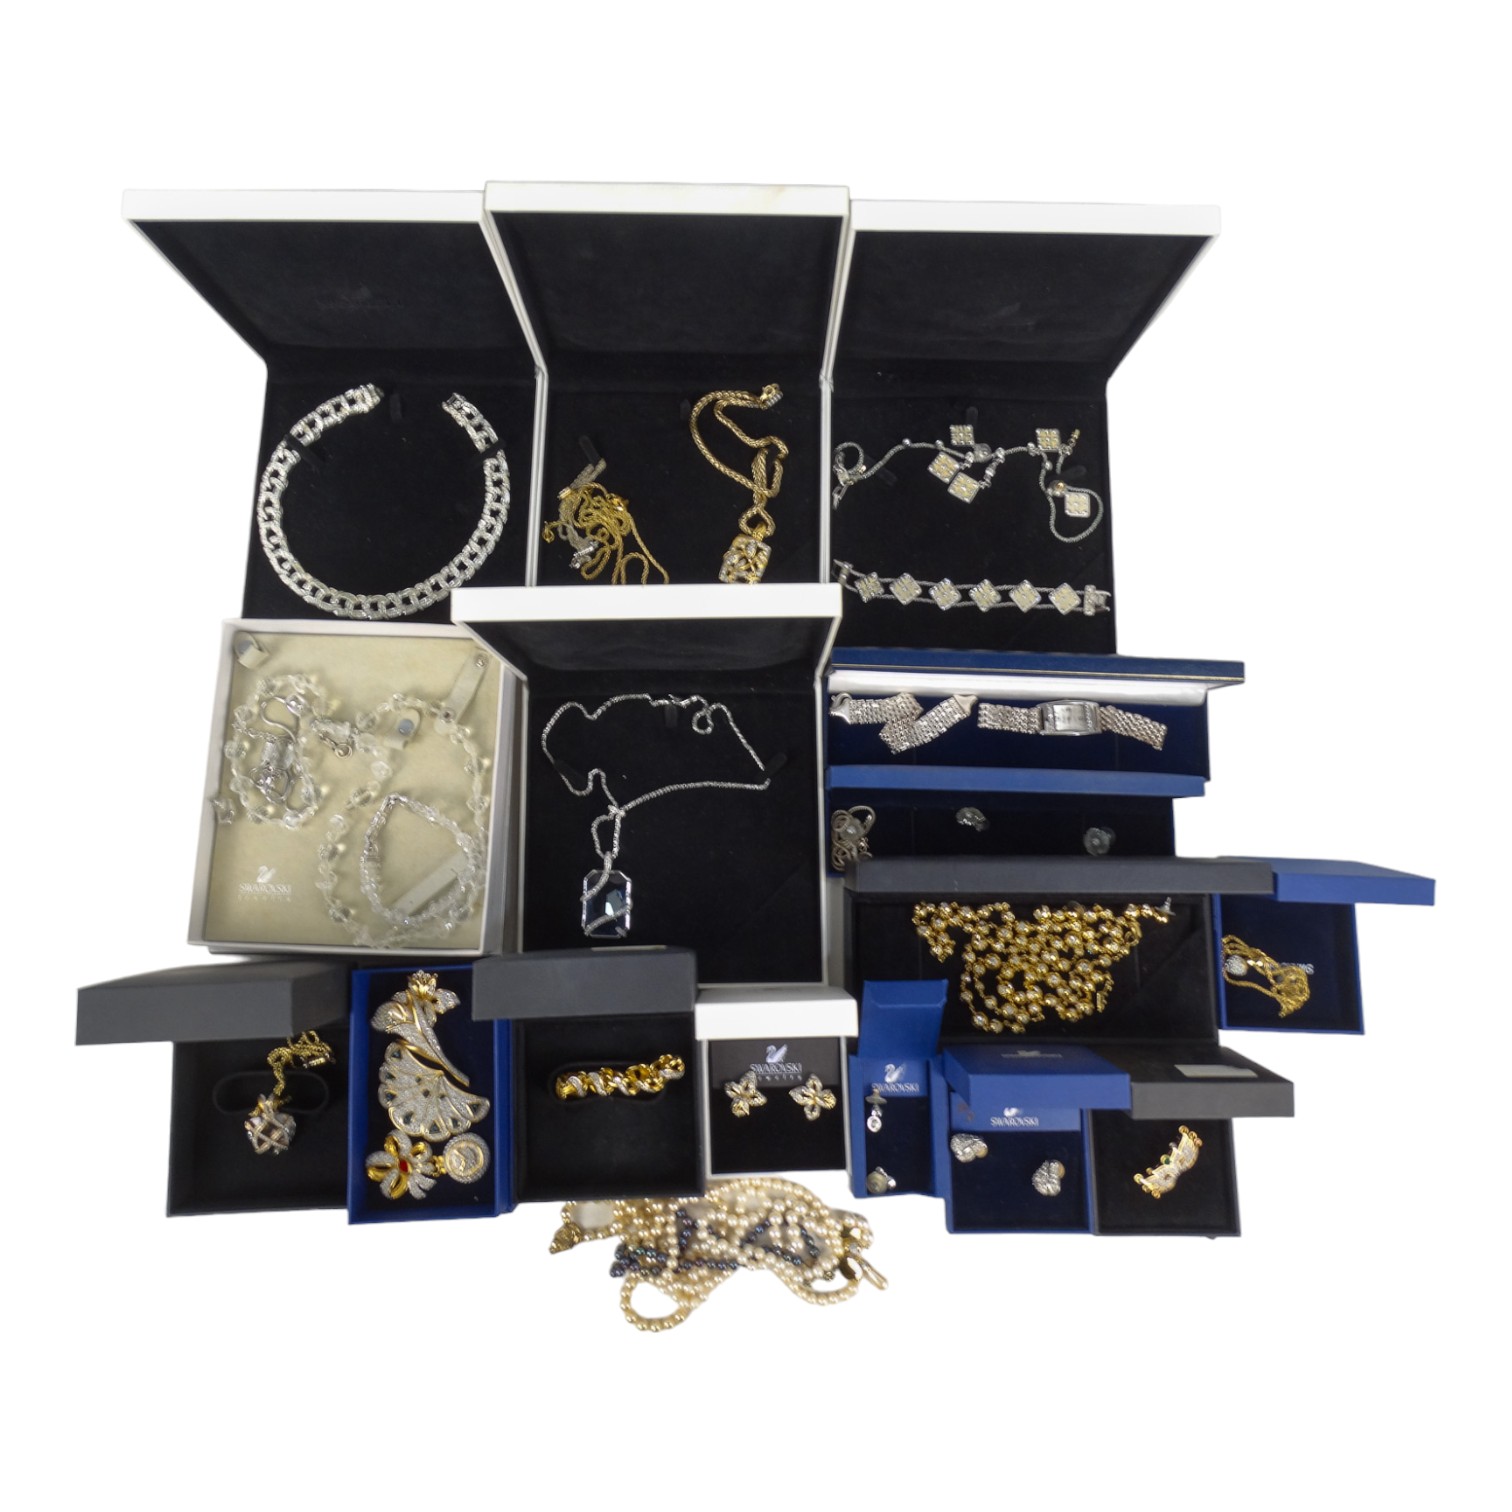 A quantity of Swarovski costume jewellery - many items with original retail boxes - Image 2 of 5